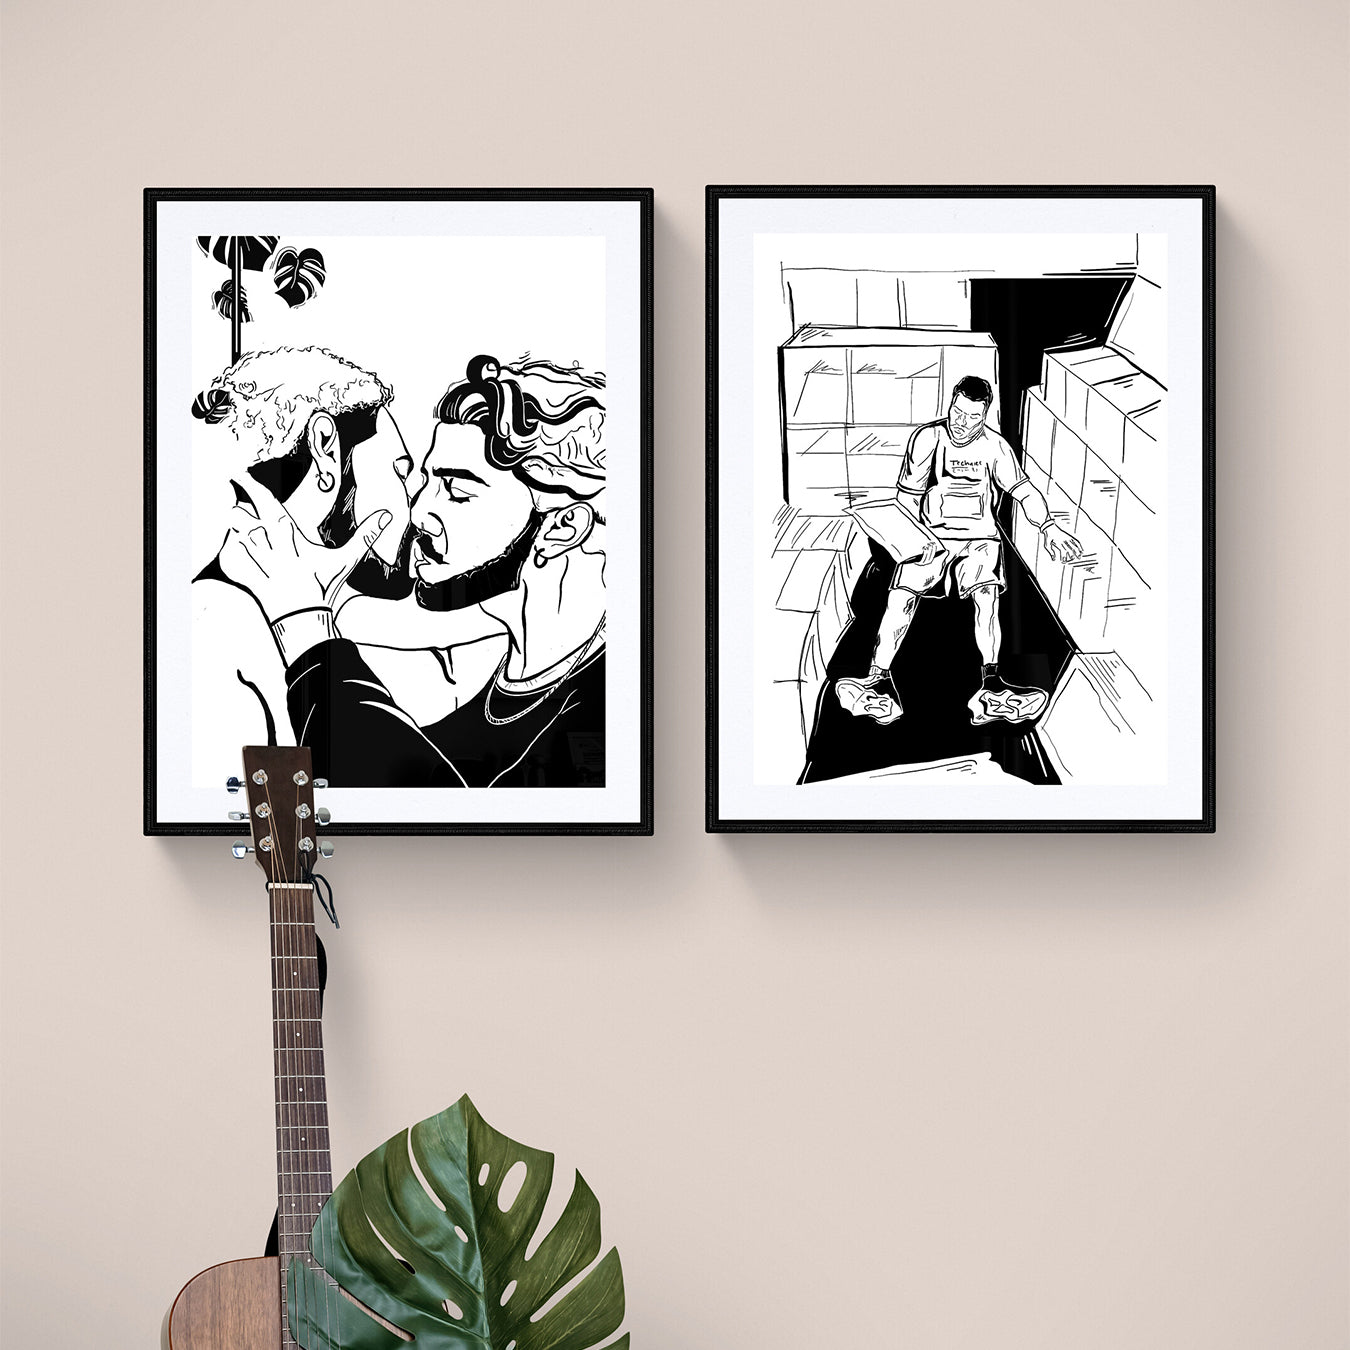 Courtney L Ellis Illustrations Art print by LGBTQ+ Illustration Artist Courtney Ellis. Wall art home decor and gifts. Art print of two gay guys kissing each other with plants surrounding them black and white art work